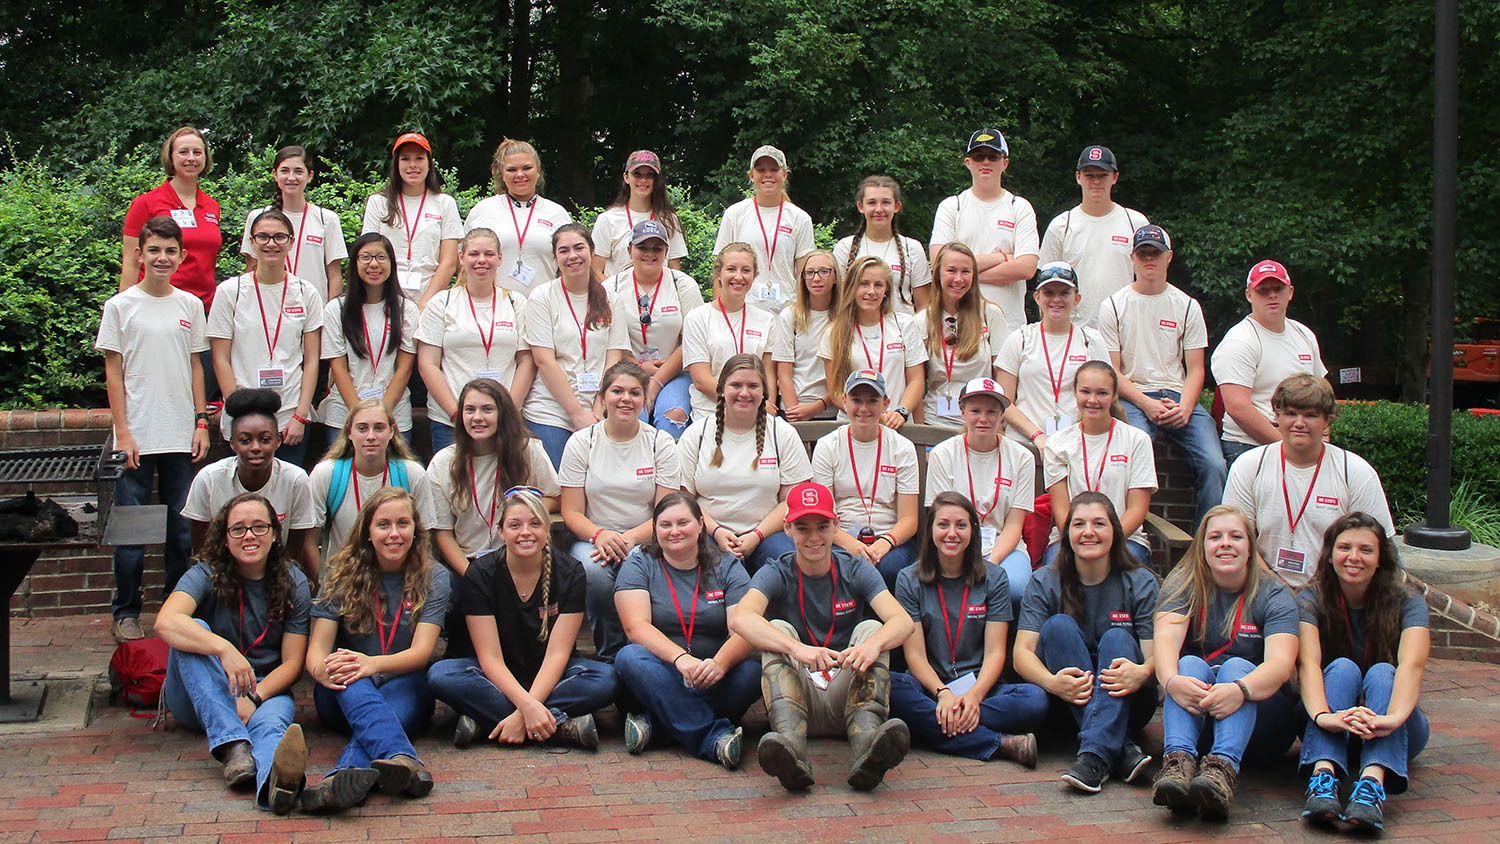 Group shot of students from Livestock Science Camp